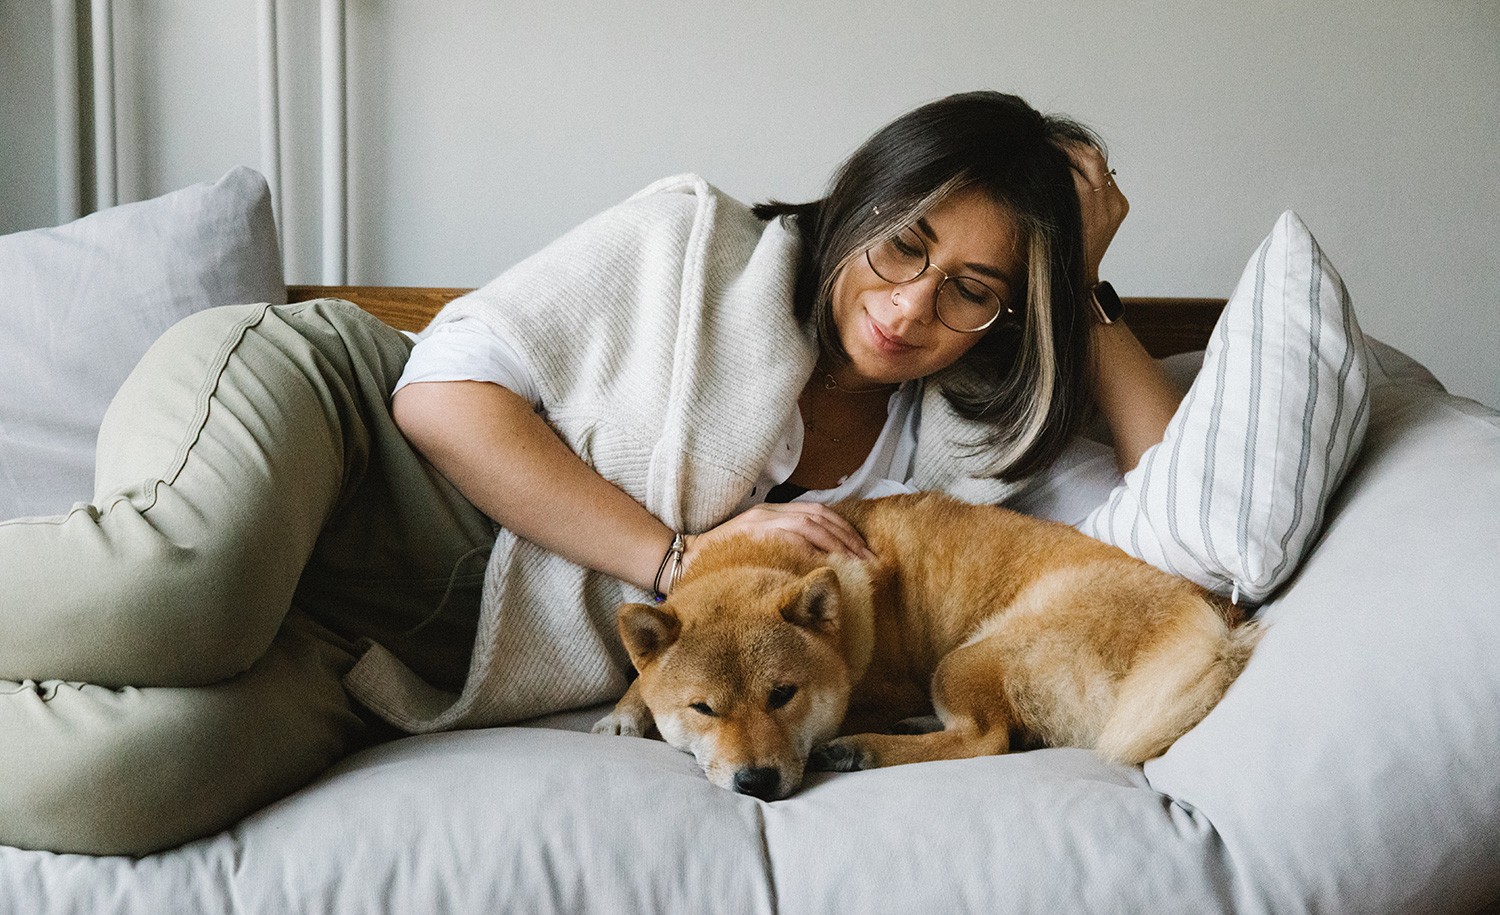 An introvert maximizes her energy by relaxing with her dog